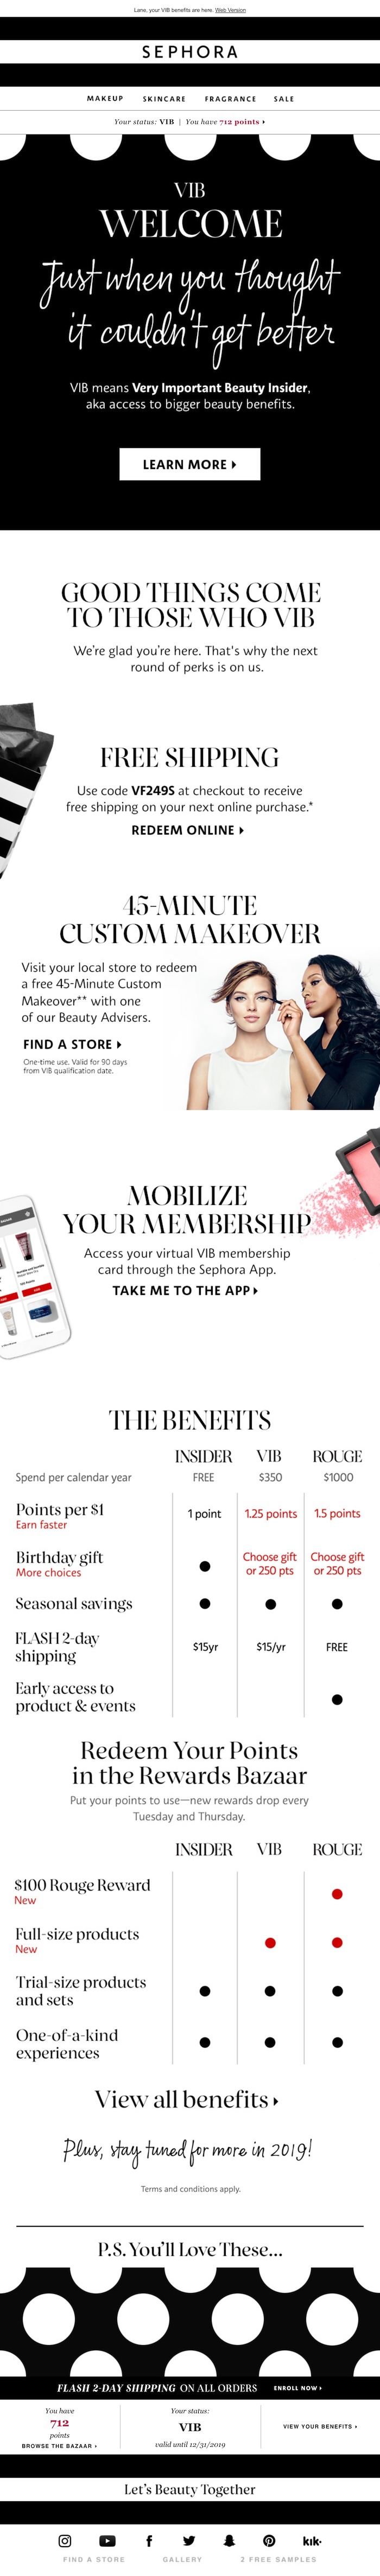 welcome email example with many options from sephora